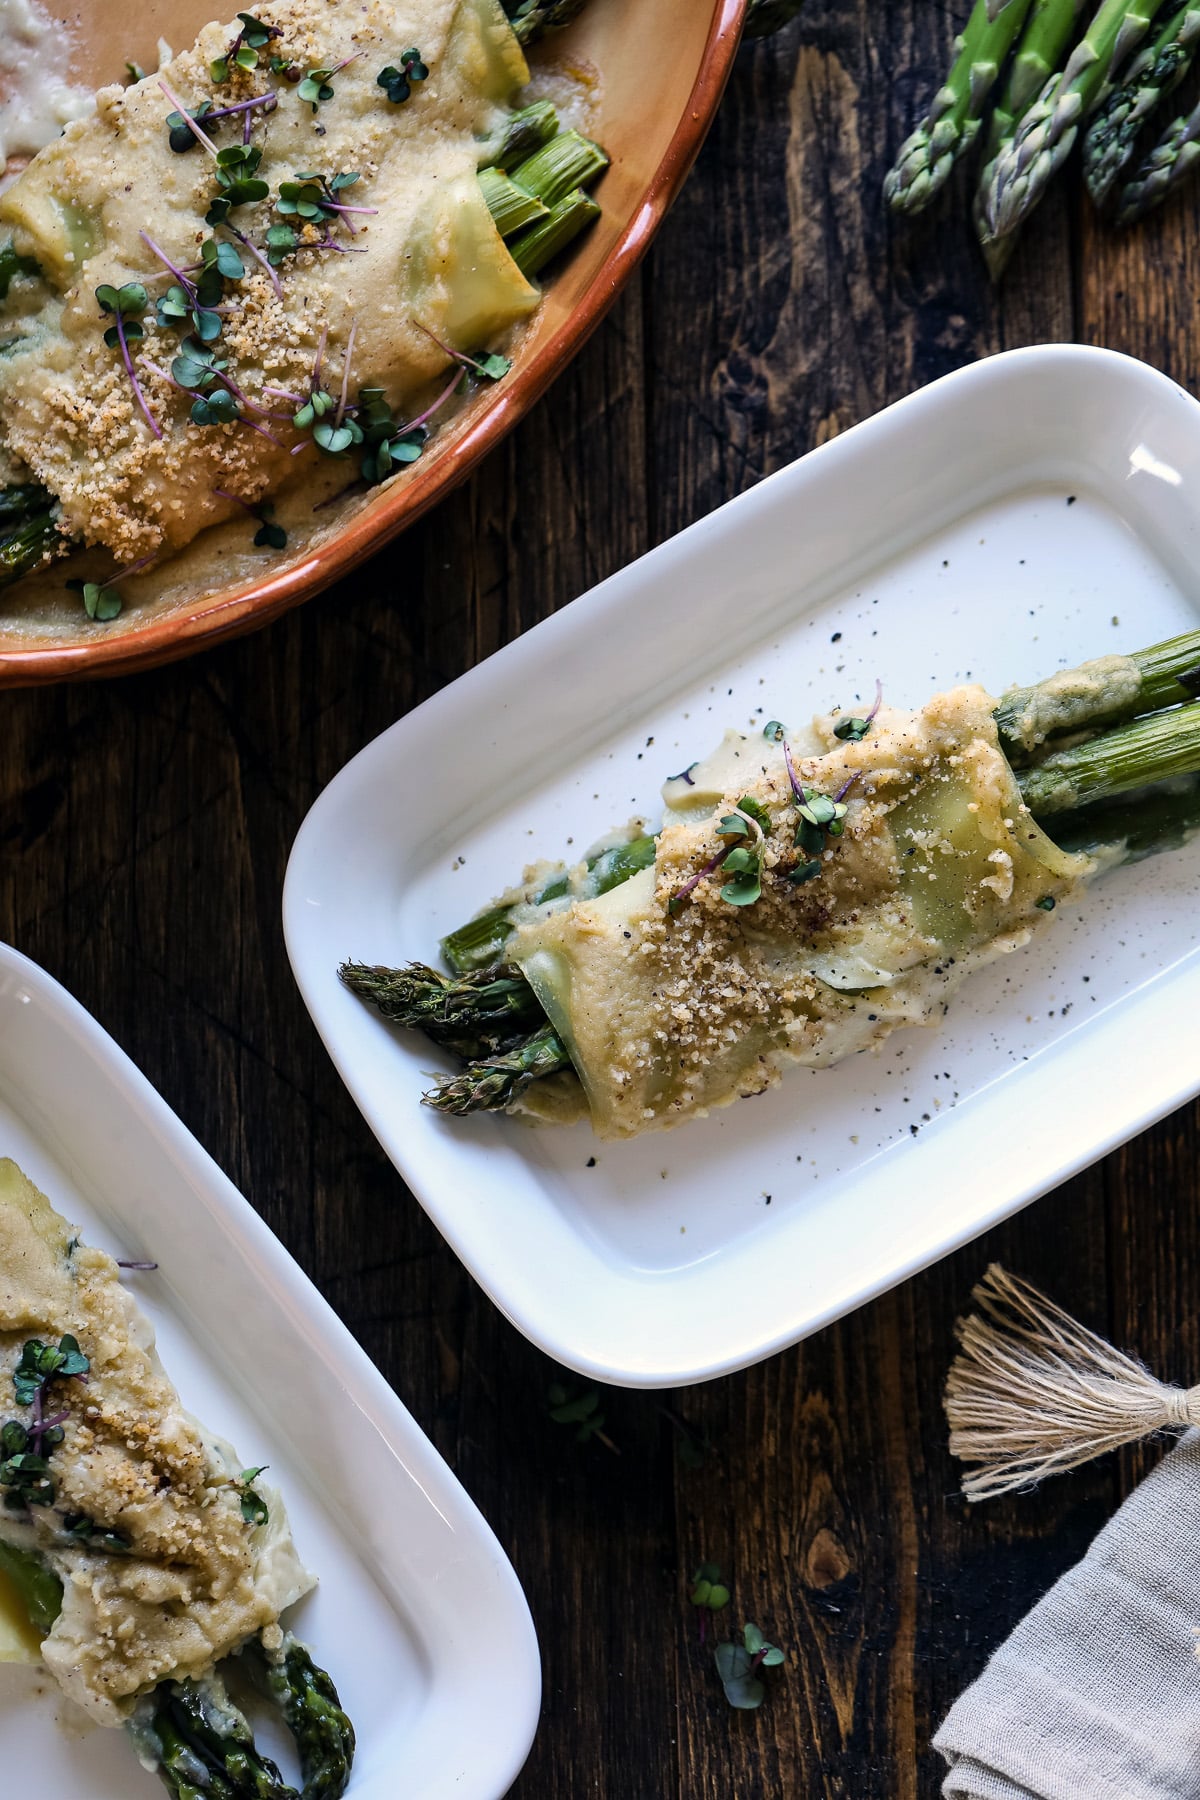 Vegan cannelloni with asparagus served on a plate.